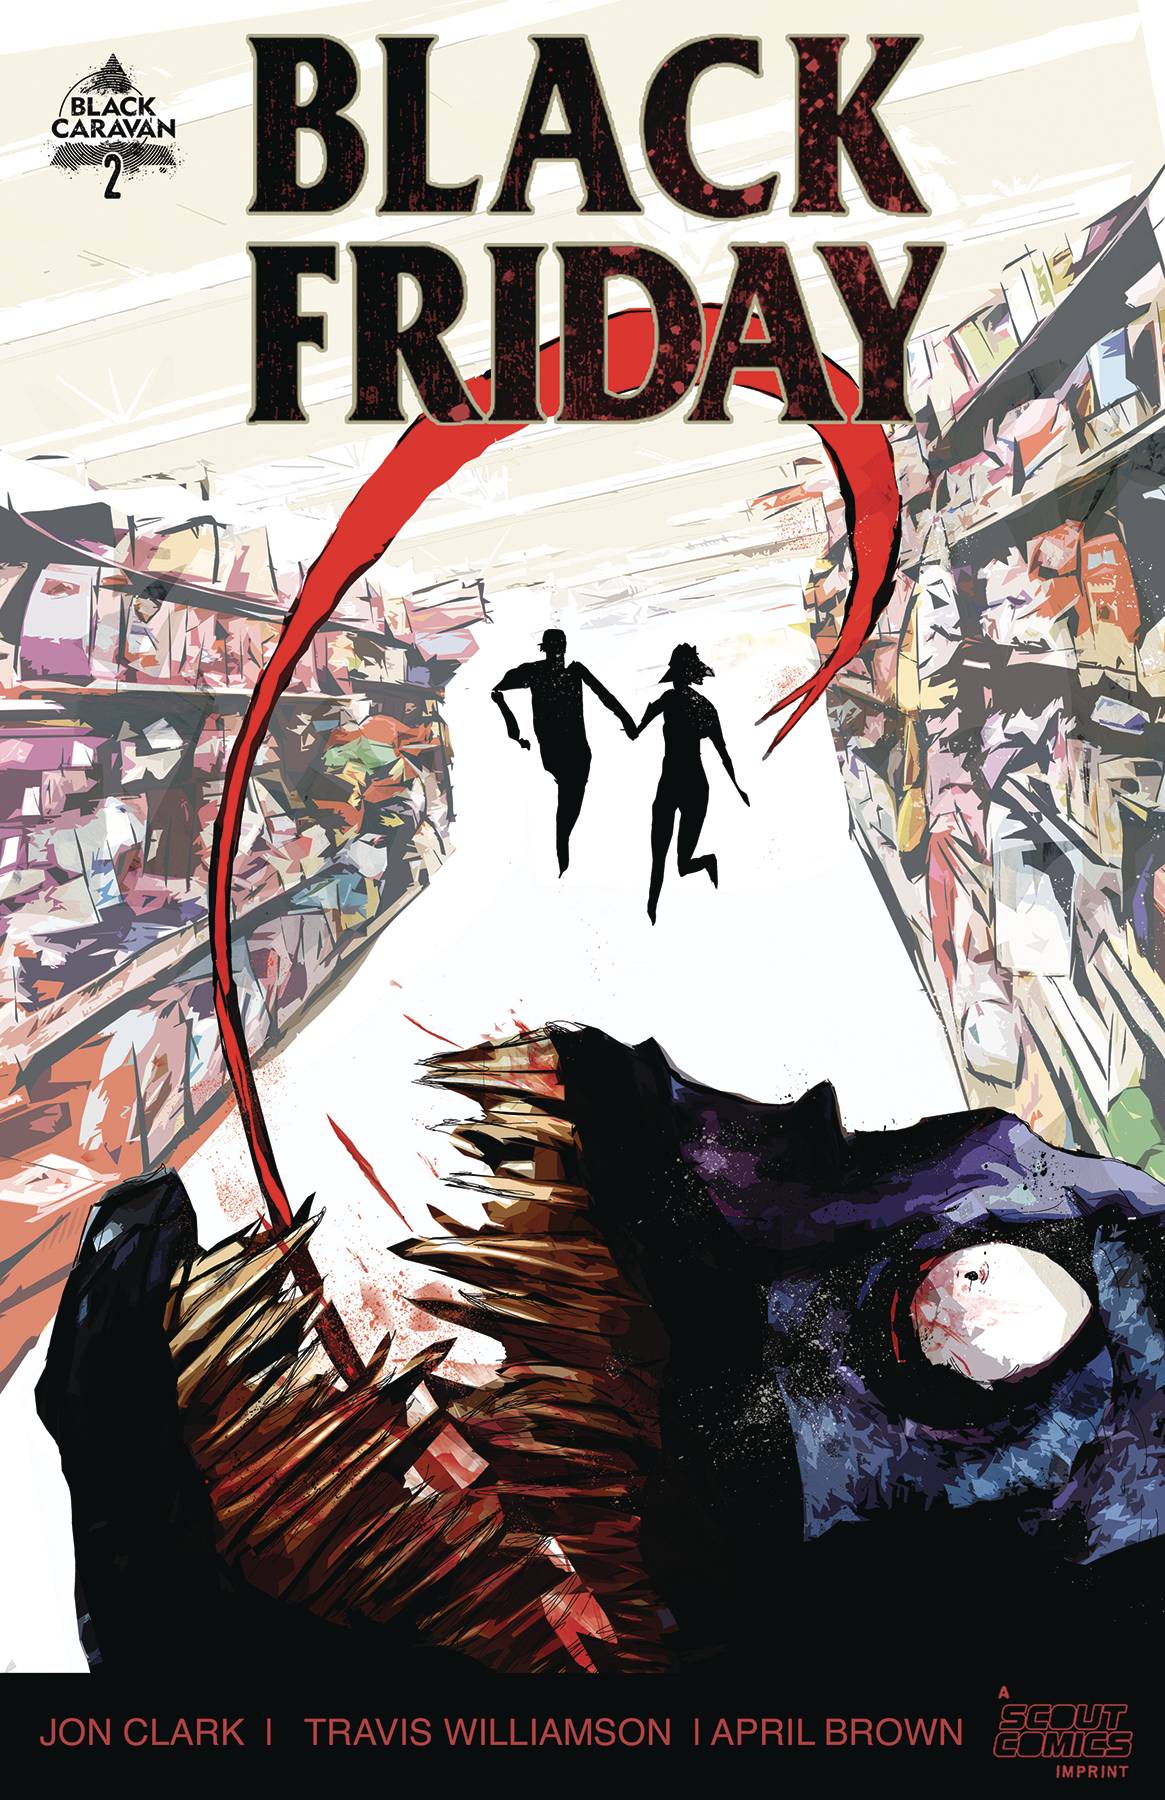 Black Friday #2 (Of 3) (Mr) (May 19 2021) - State of Comics